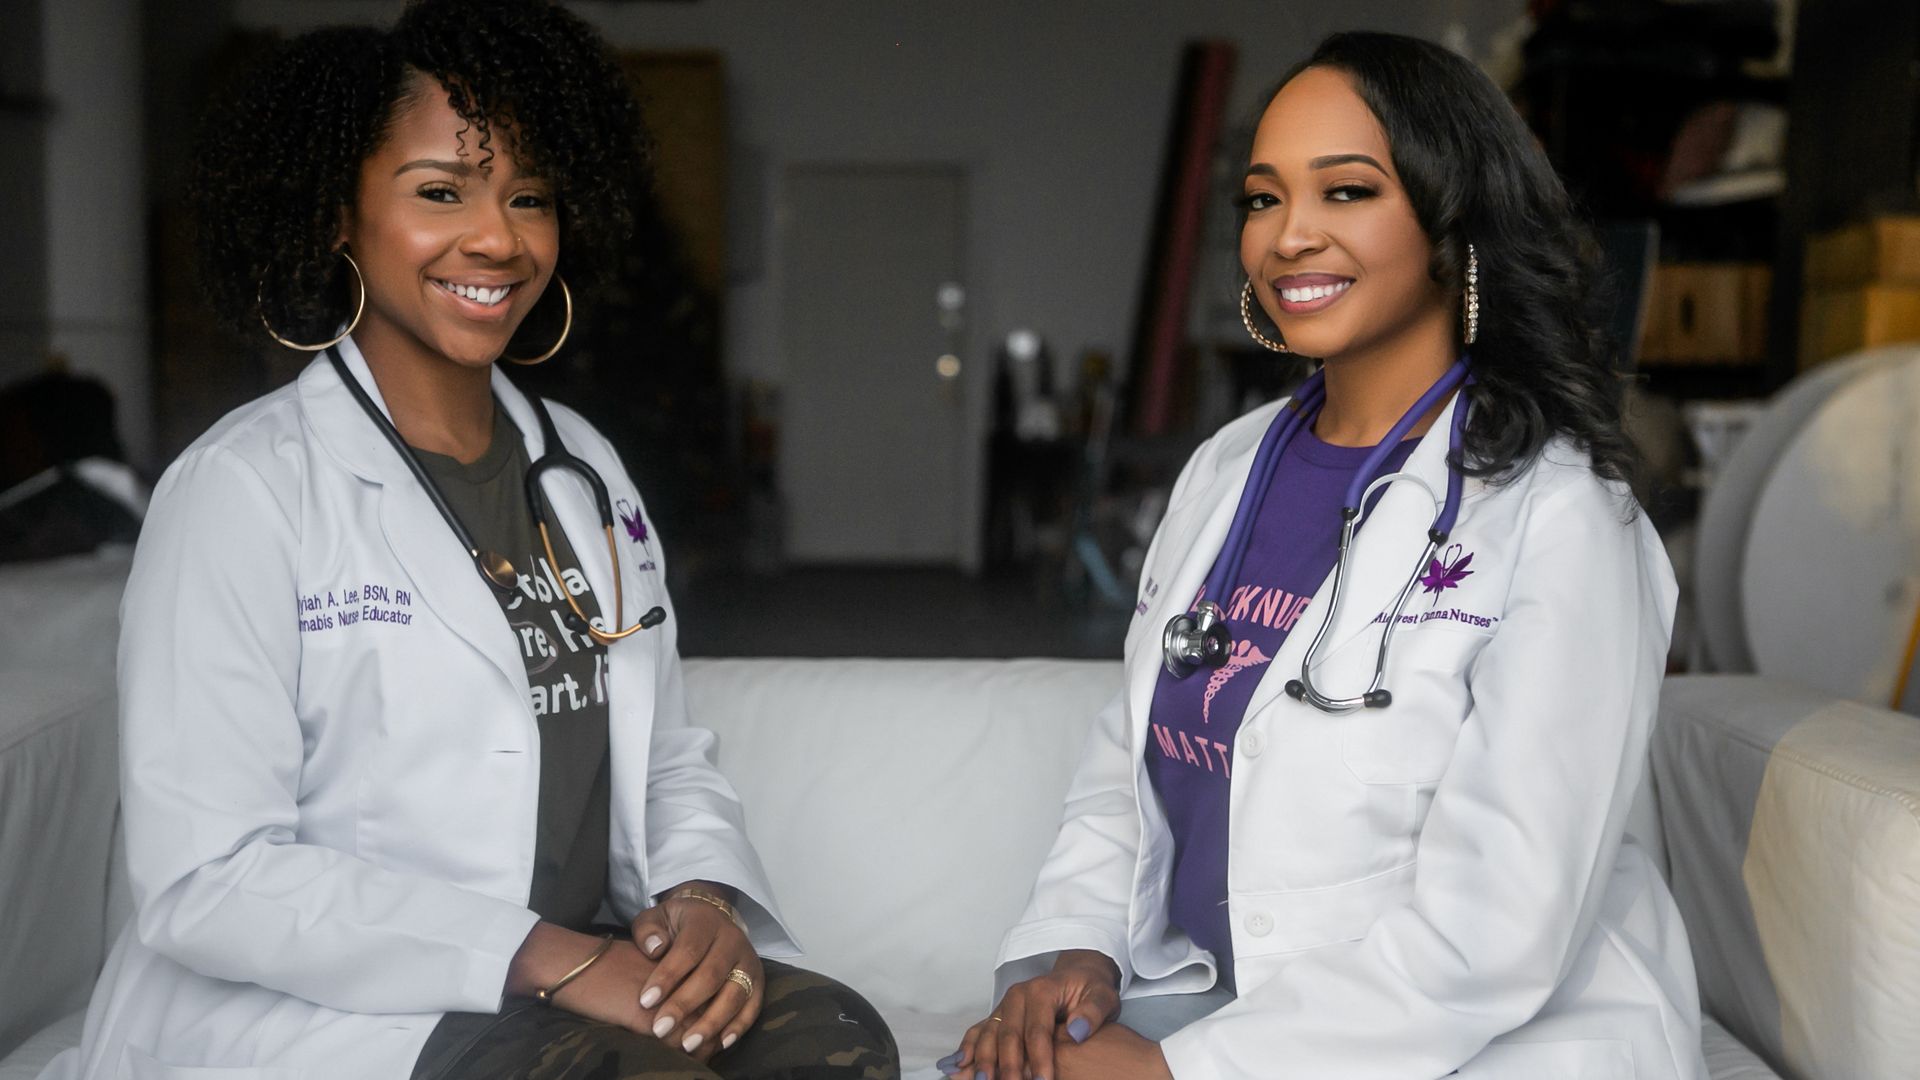 The two founders of Midwest CannaNurses sit in their white coats 